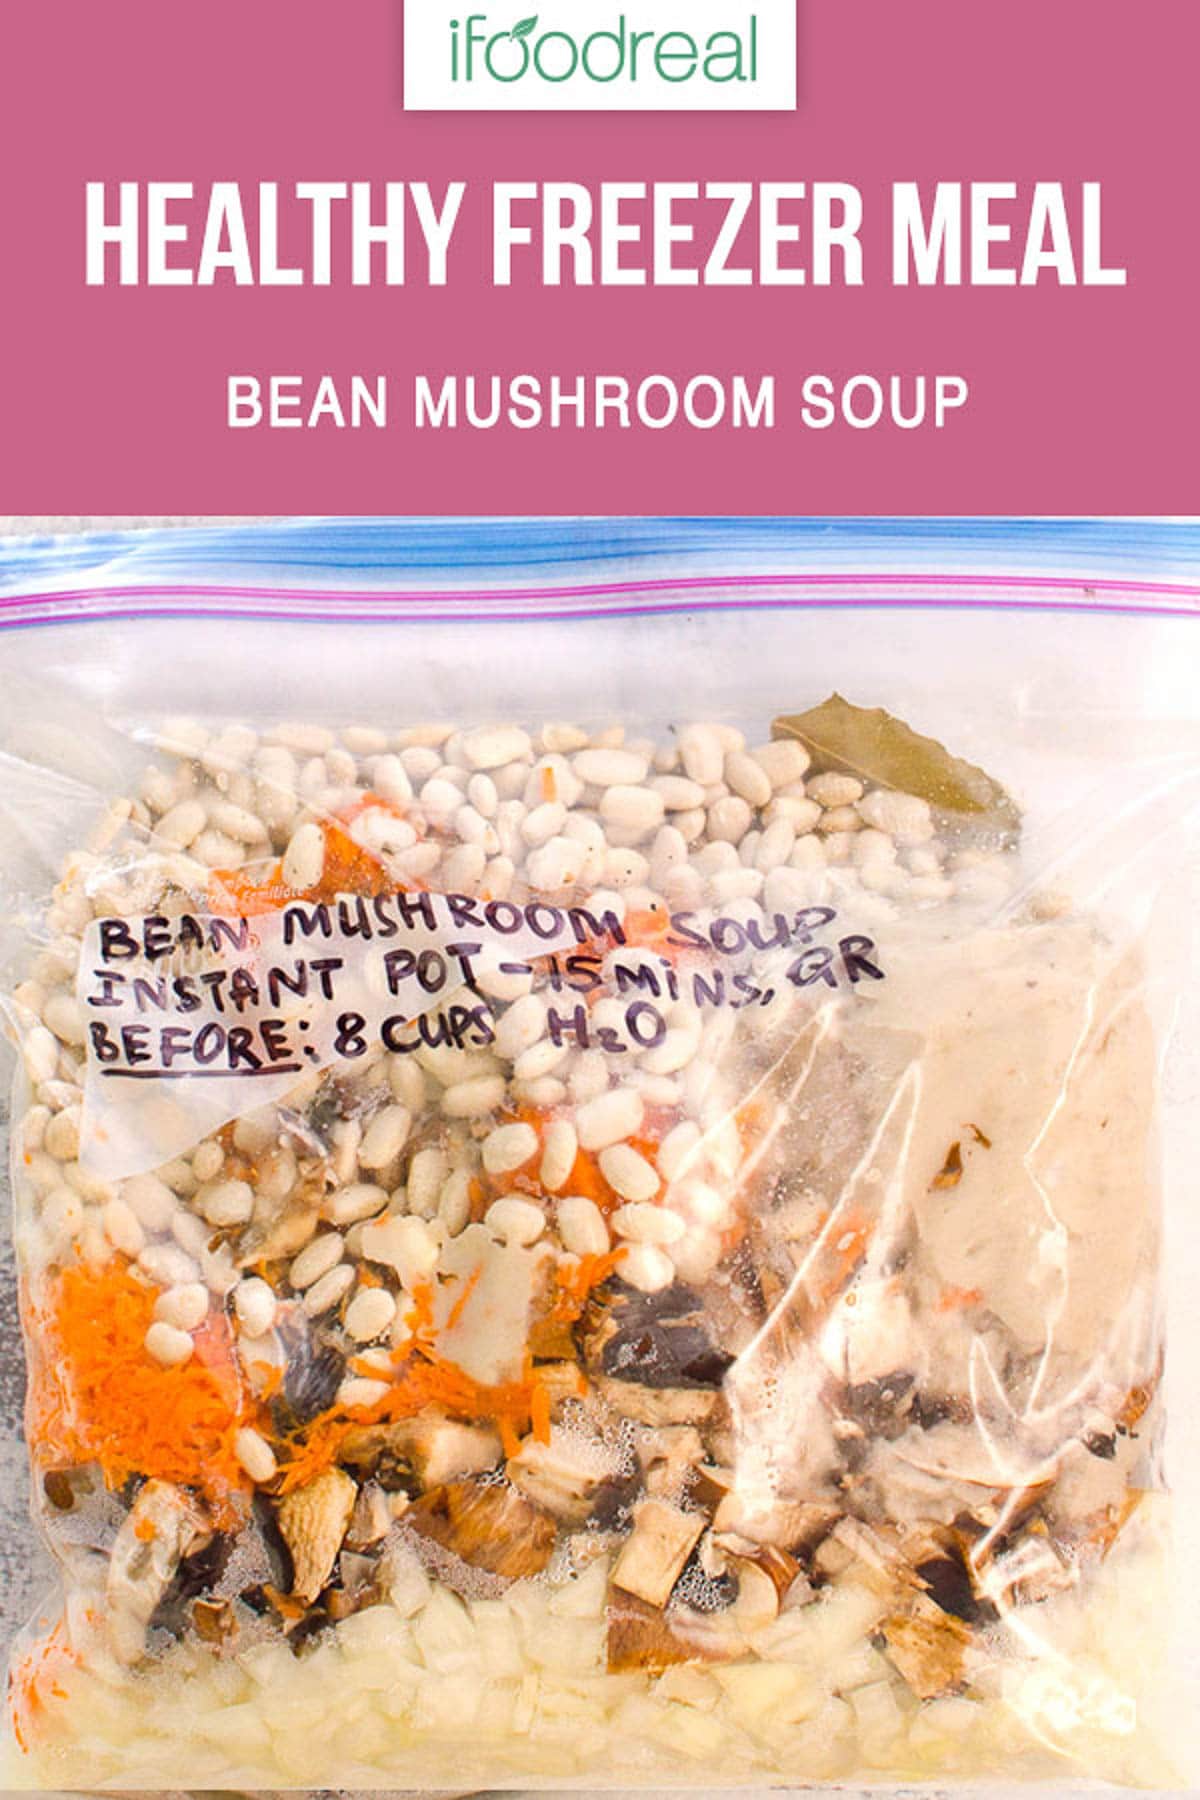 Bag with mushroom bean soup ingredients packed as a freezer meal.